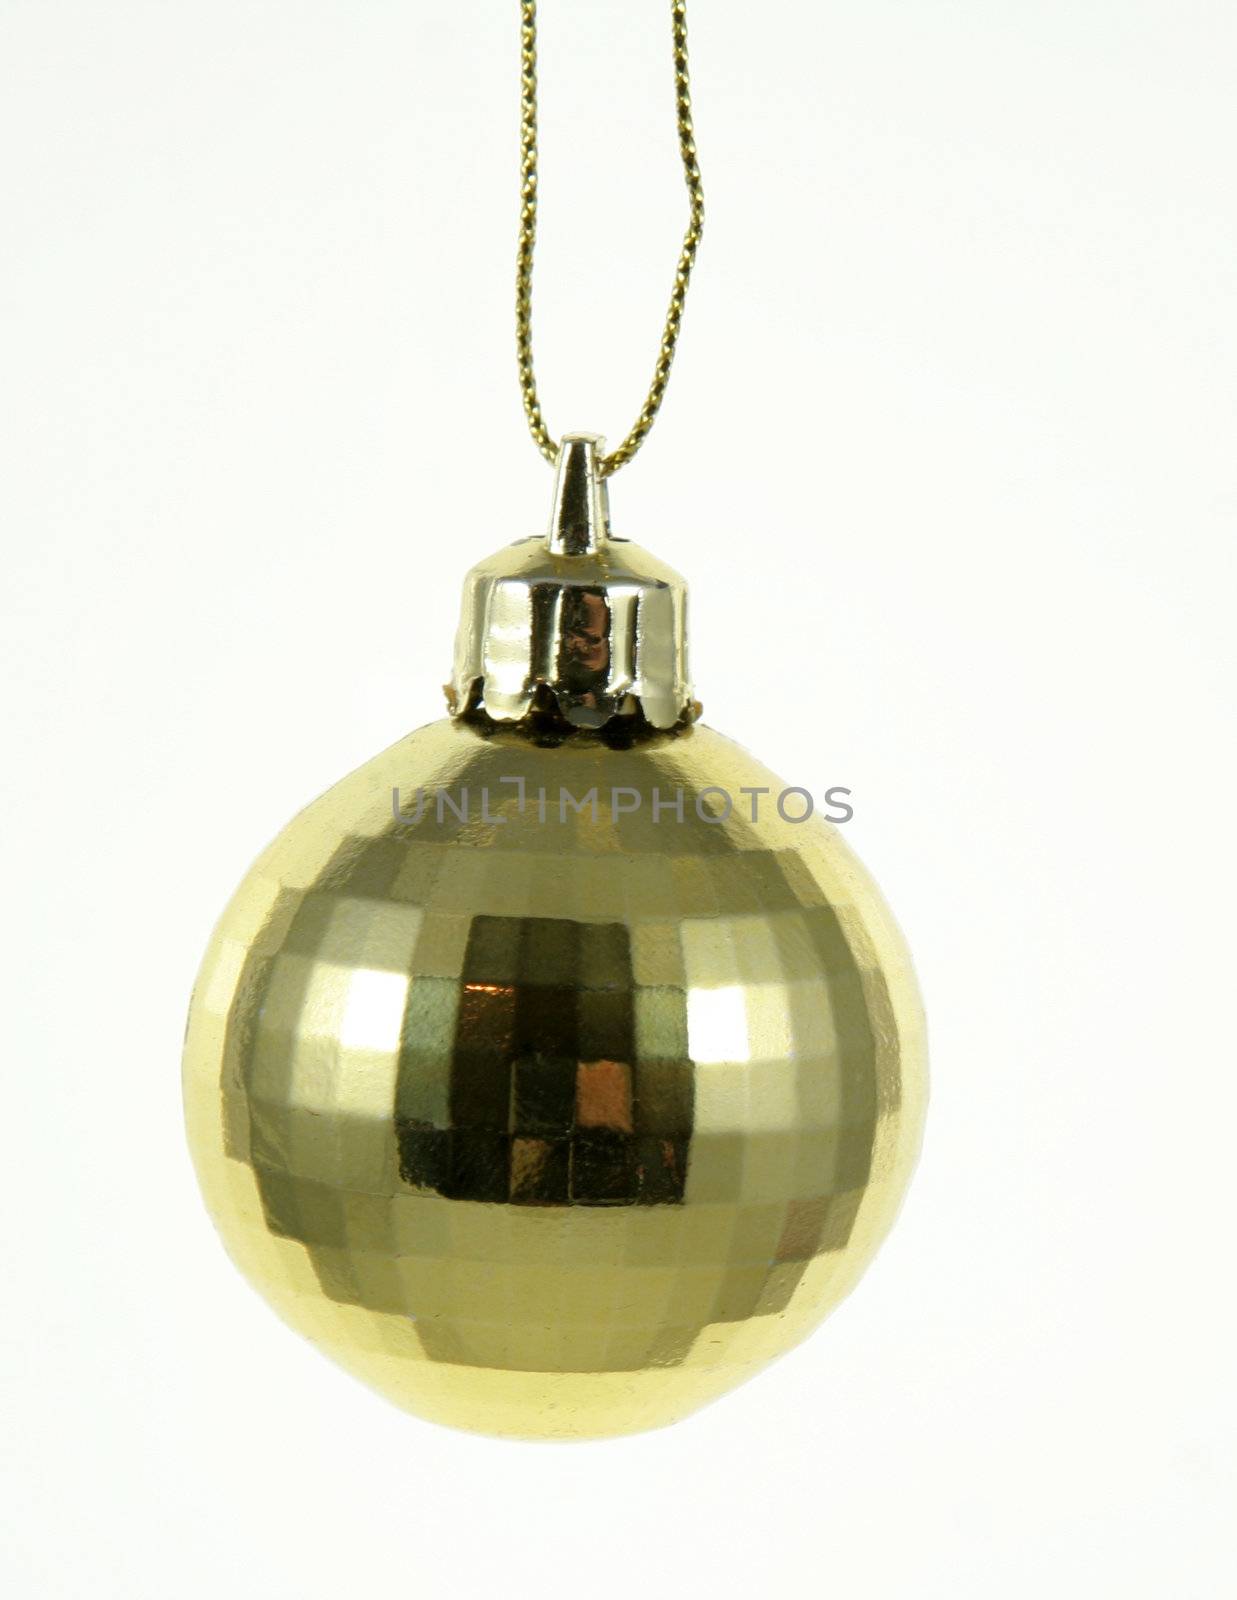 Golden Xmas Bauble
 by ca2hill